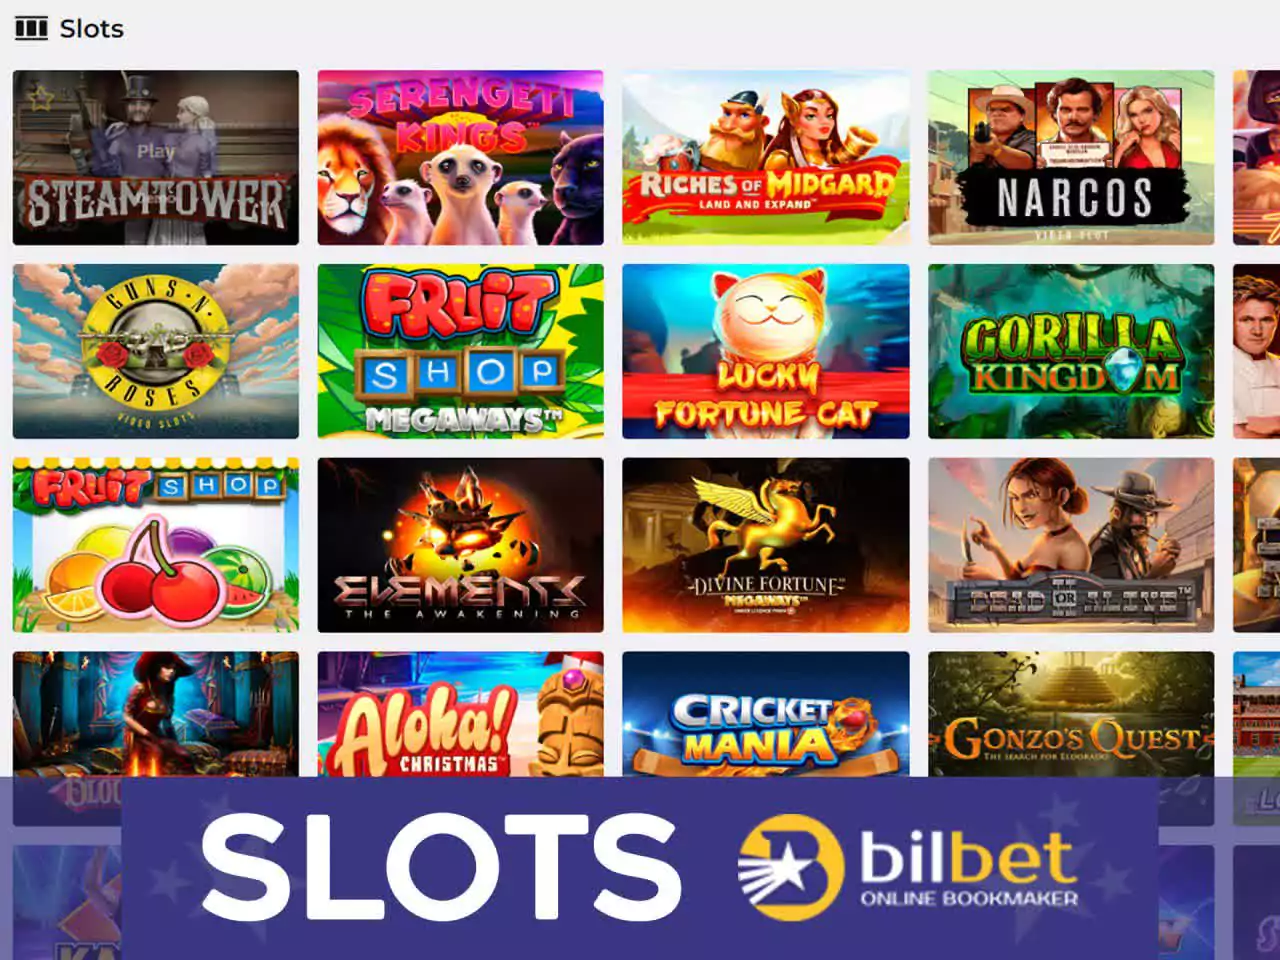 Slots is the largest casino section at Bilbet.